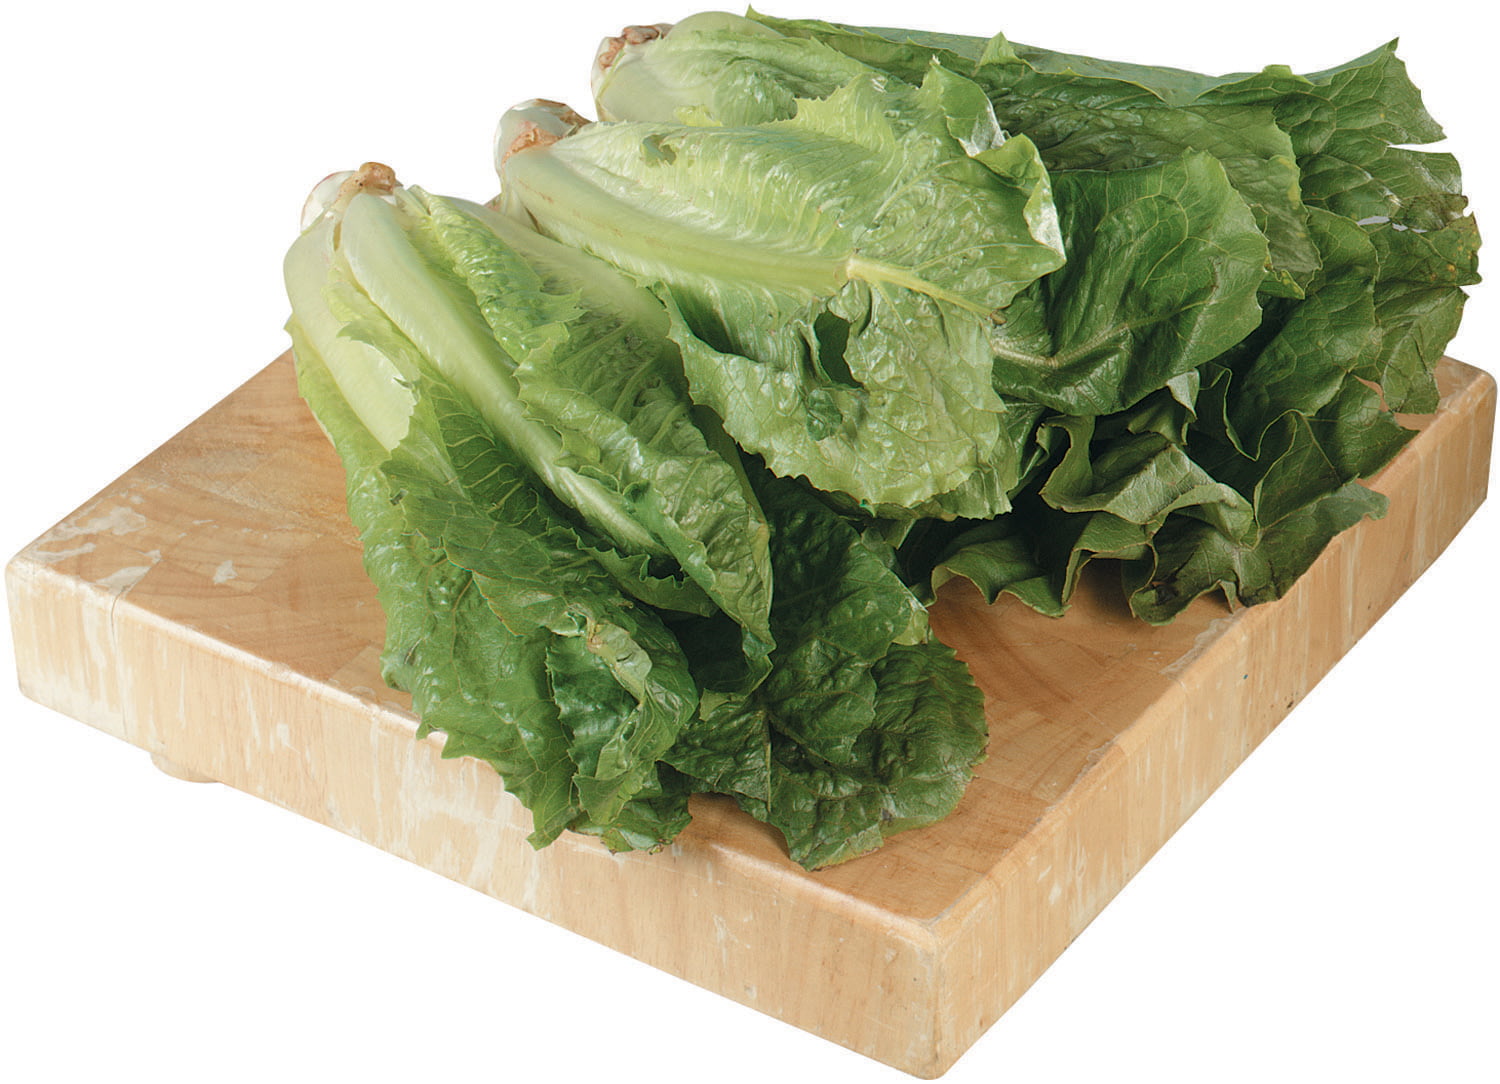 Romaine Hearts on Wooden Block Food Picture